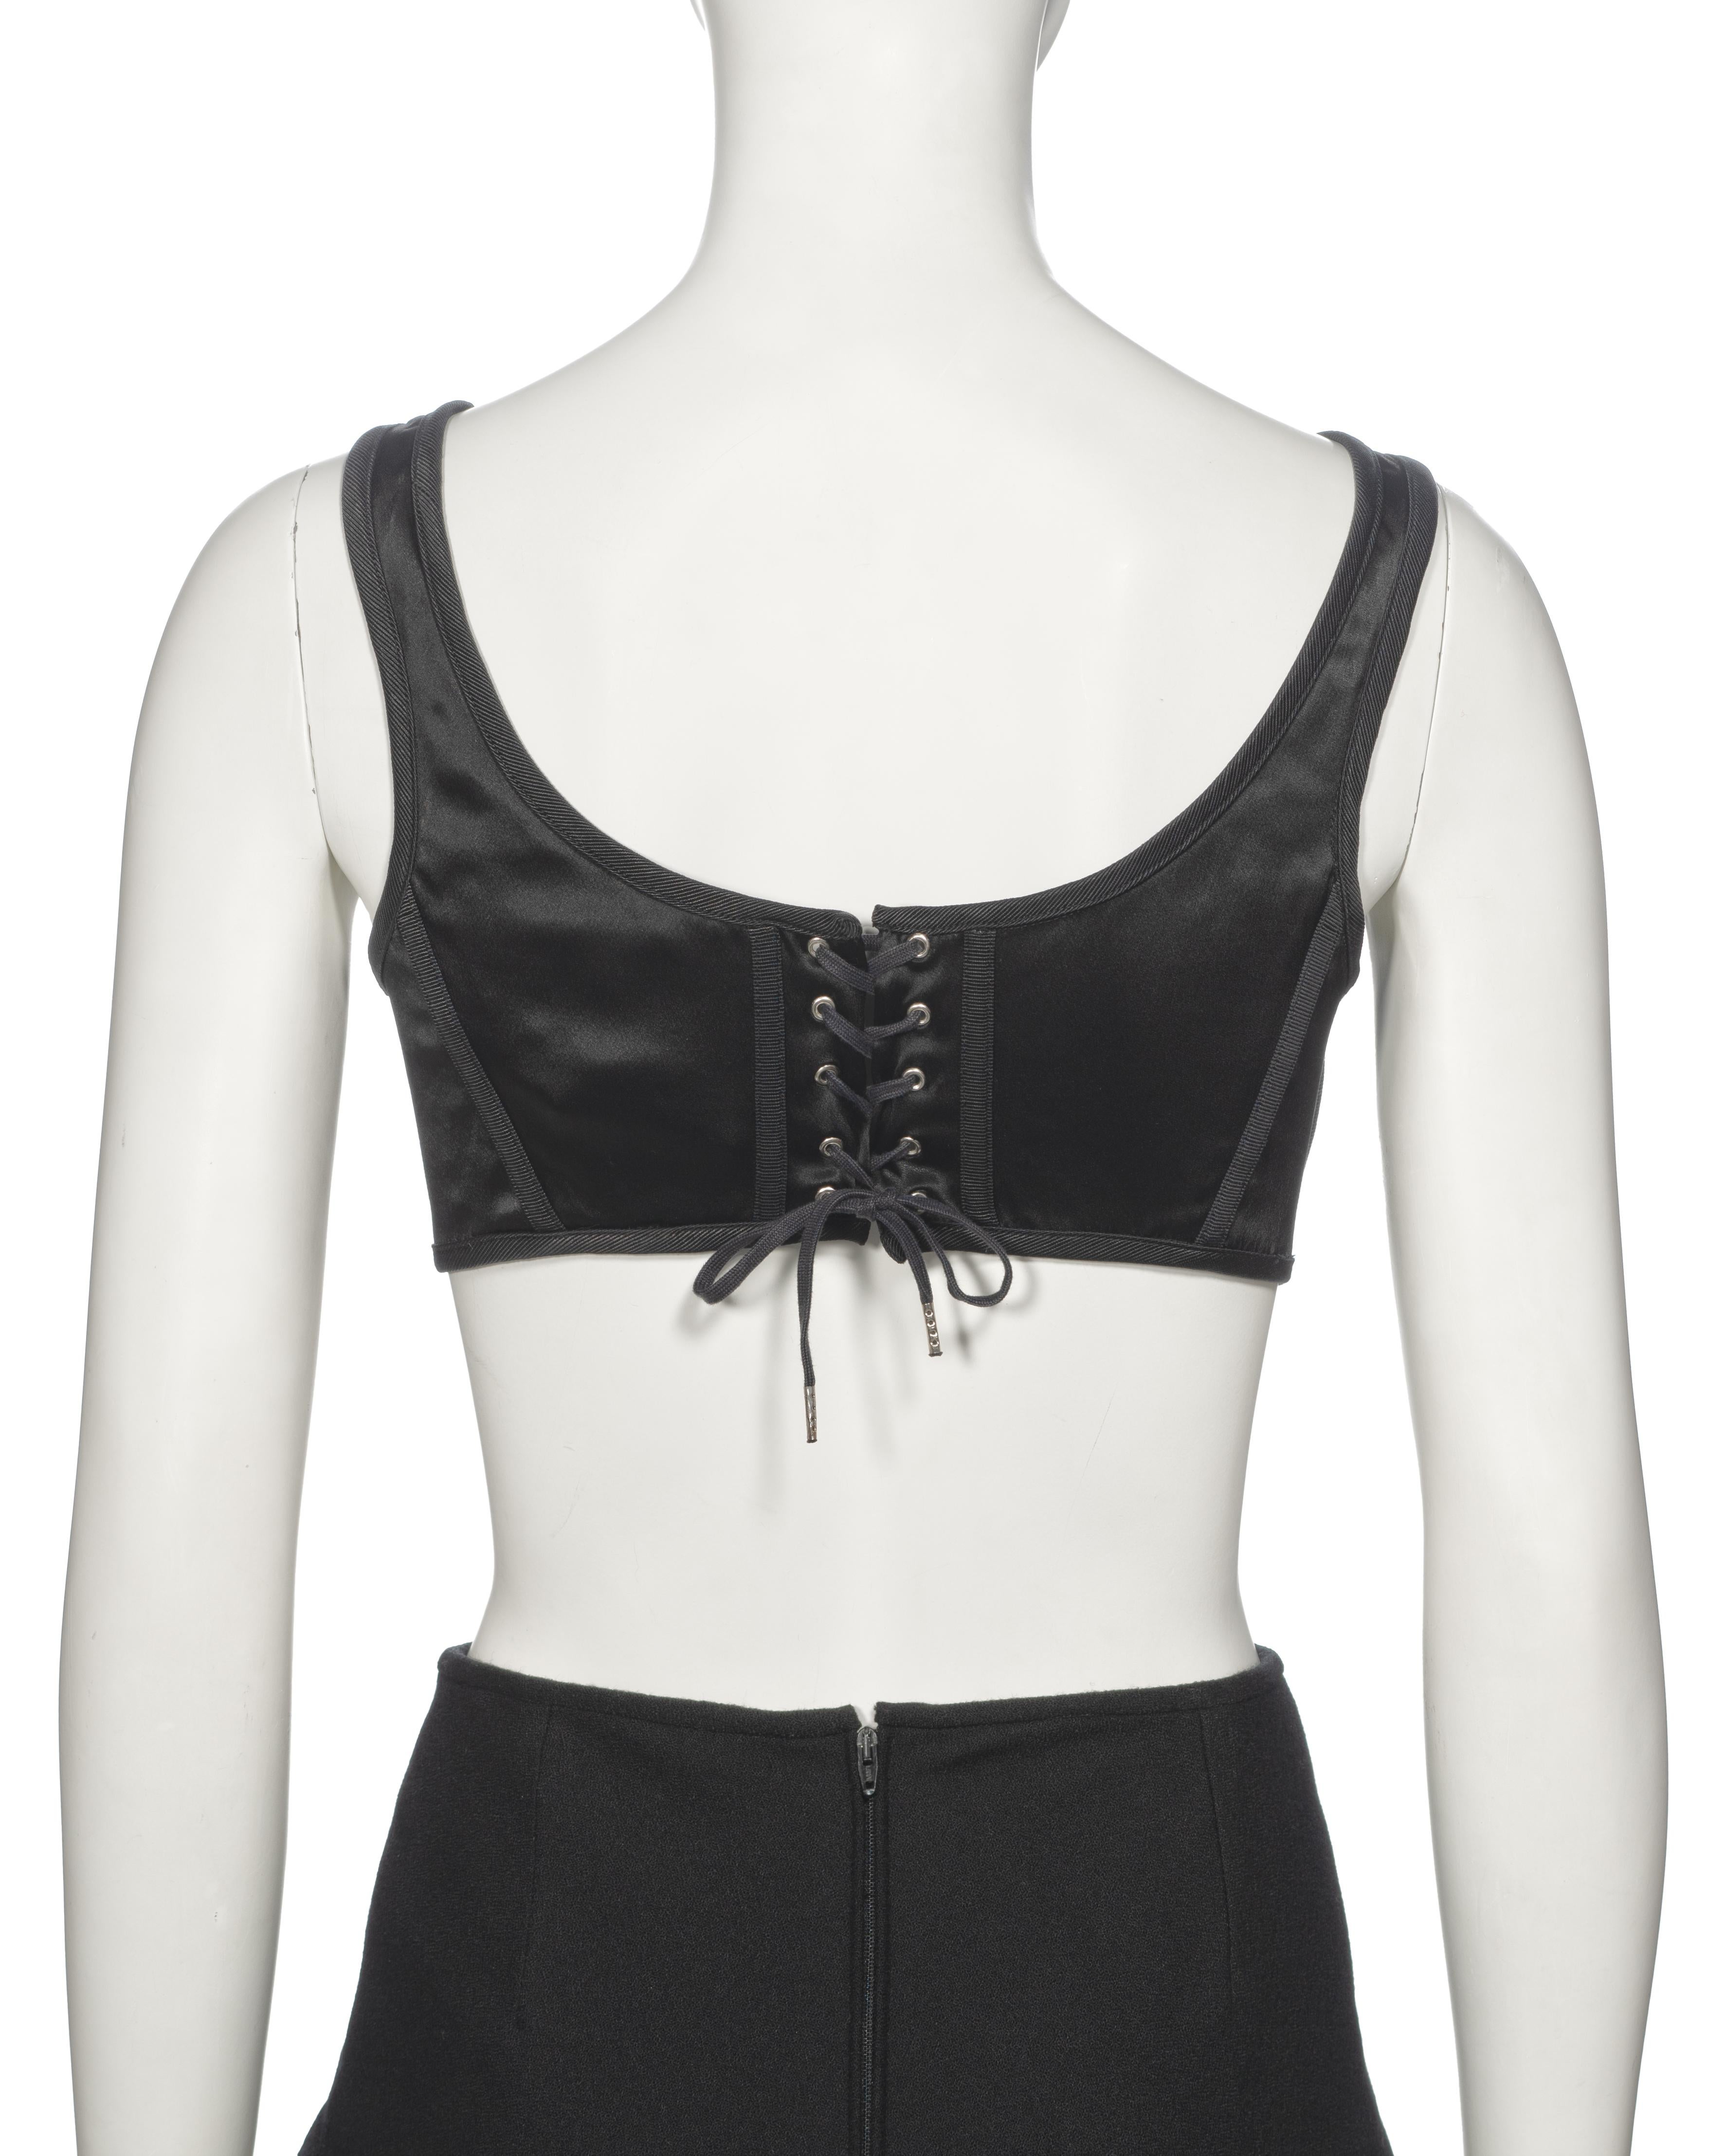 Jean Paul Gaultier Black Cut-Out Cone Bra and Midi Skirt Set, ss 1993 For Sale 10